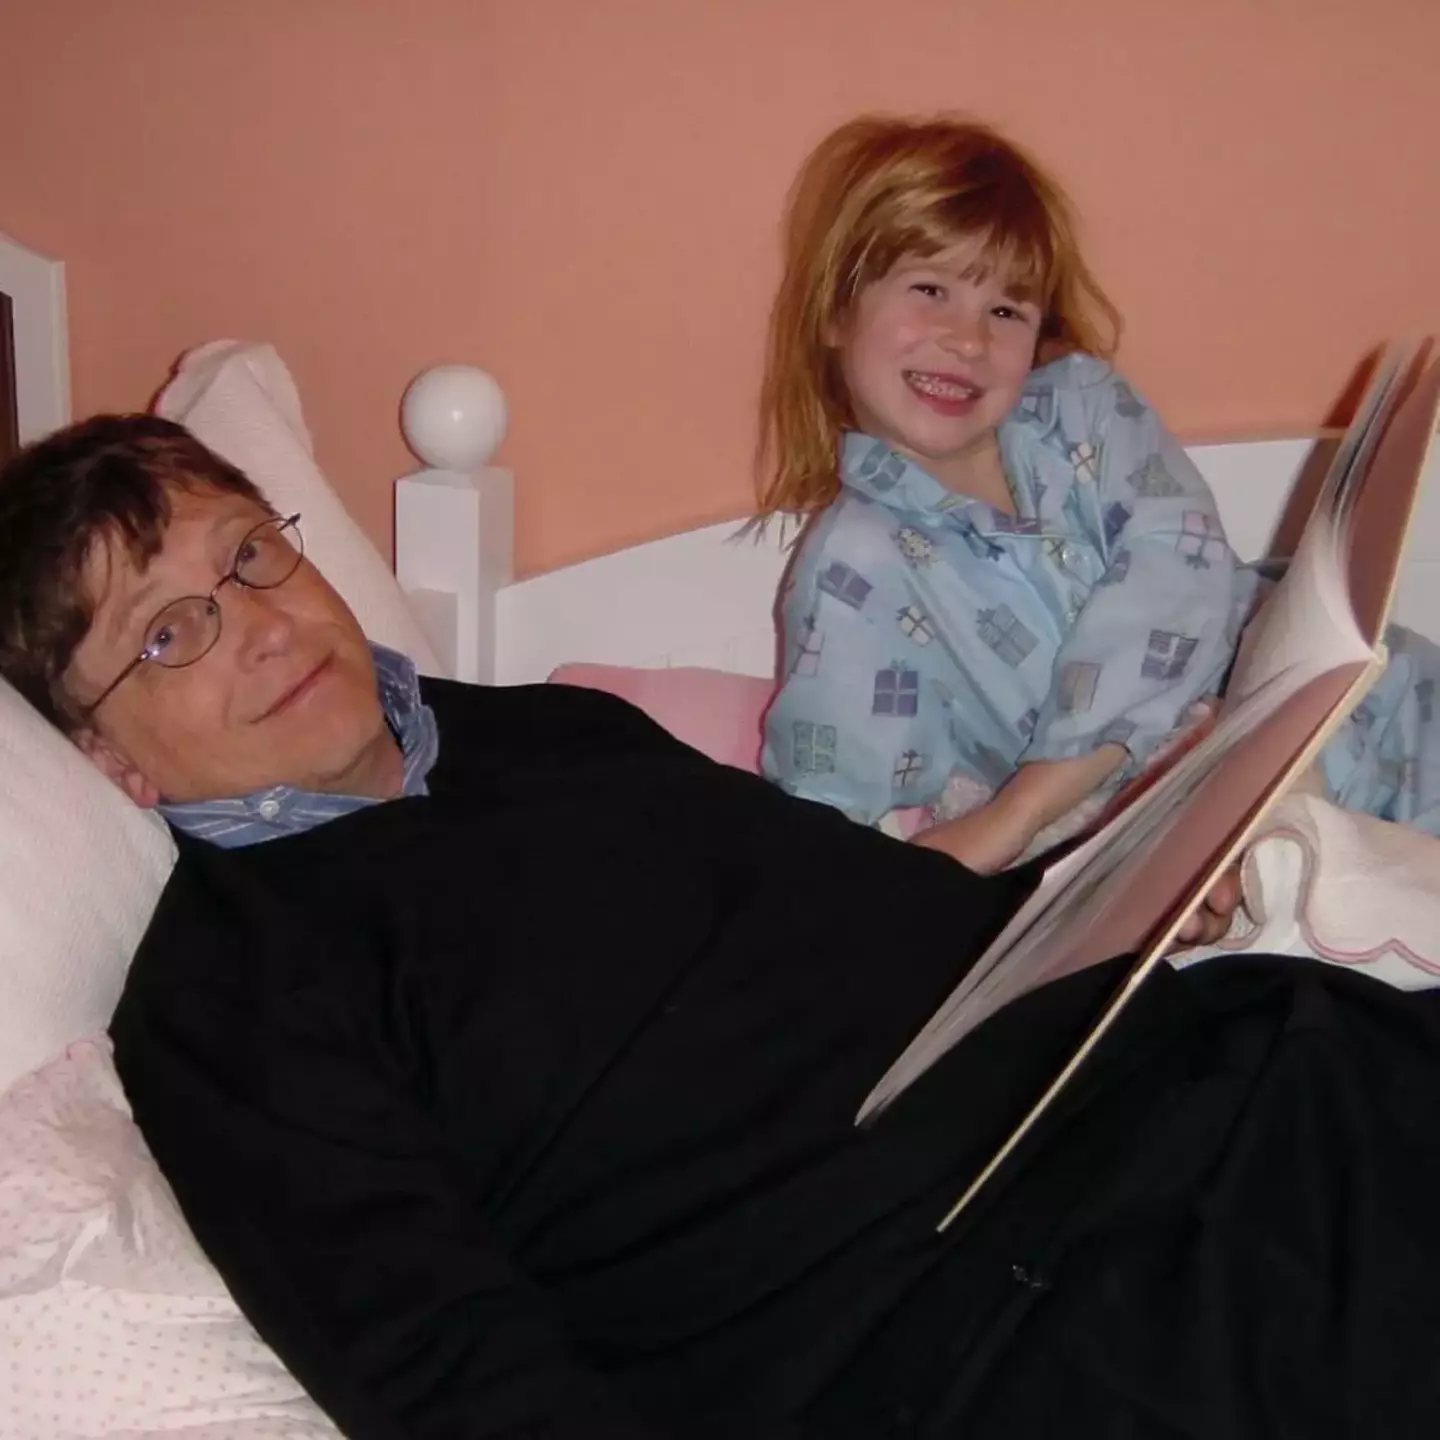 Bill Gates had some strict rules for his kids when it came to technology.